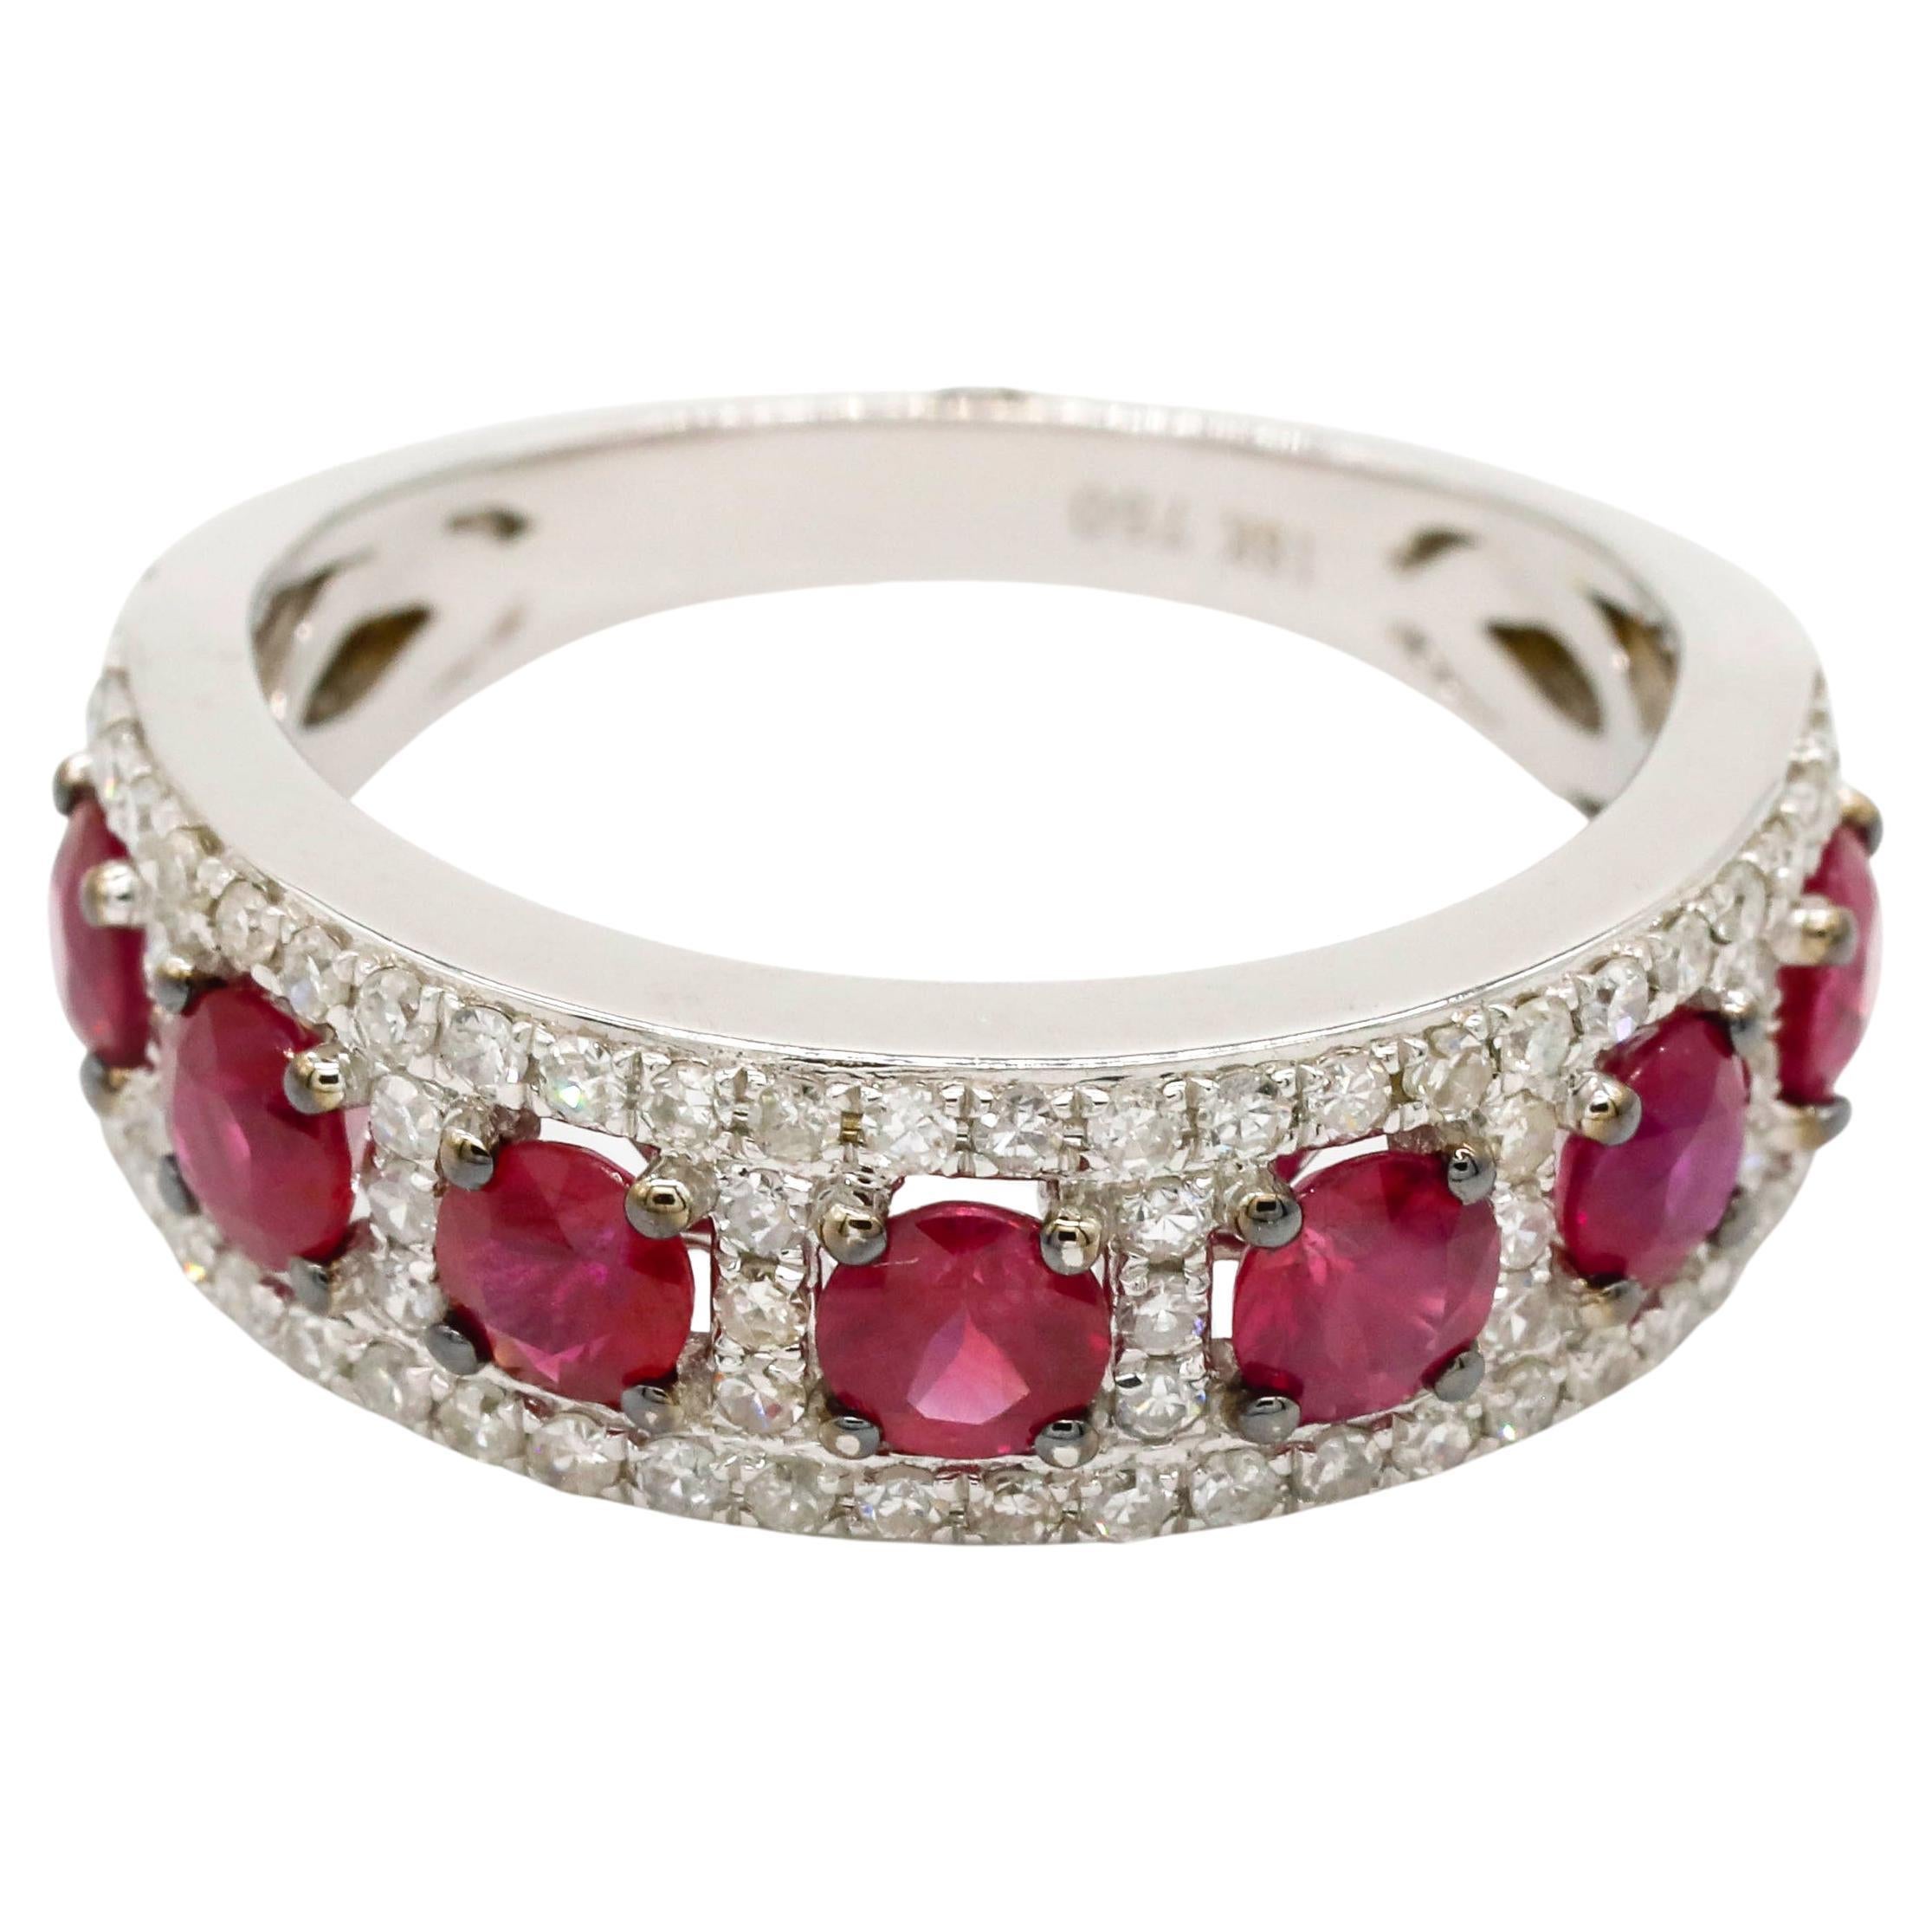 1.00 TCW Round Cut Ruby Prong Setting Diamond Band Ring in 18 k Gold White For Sale